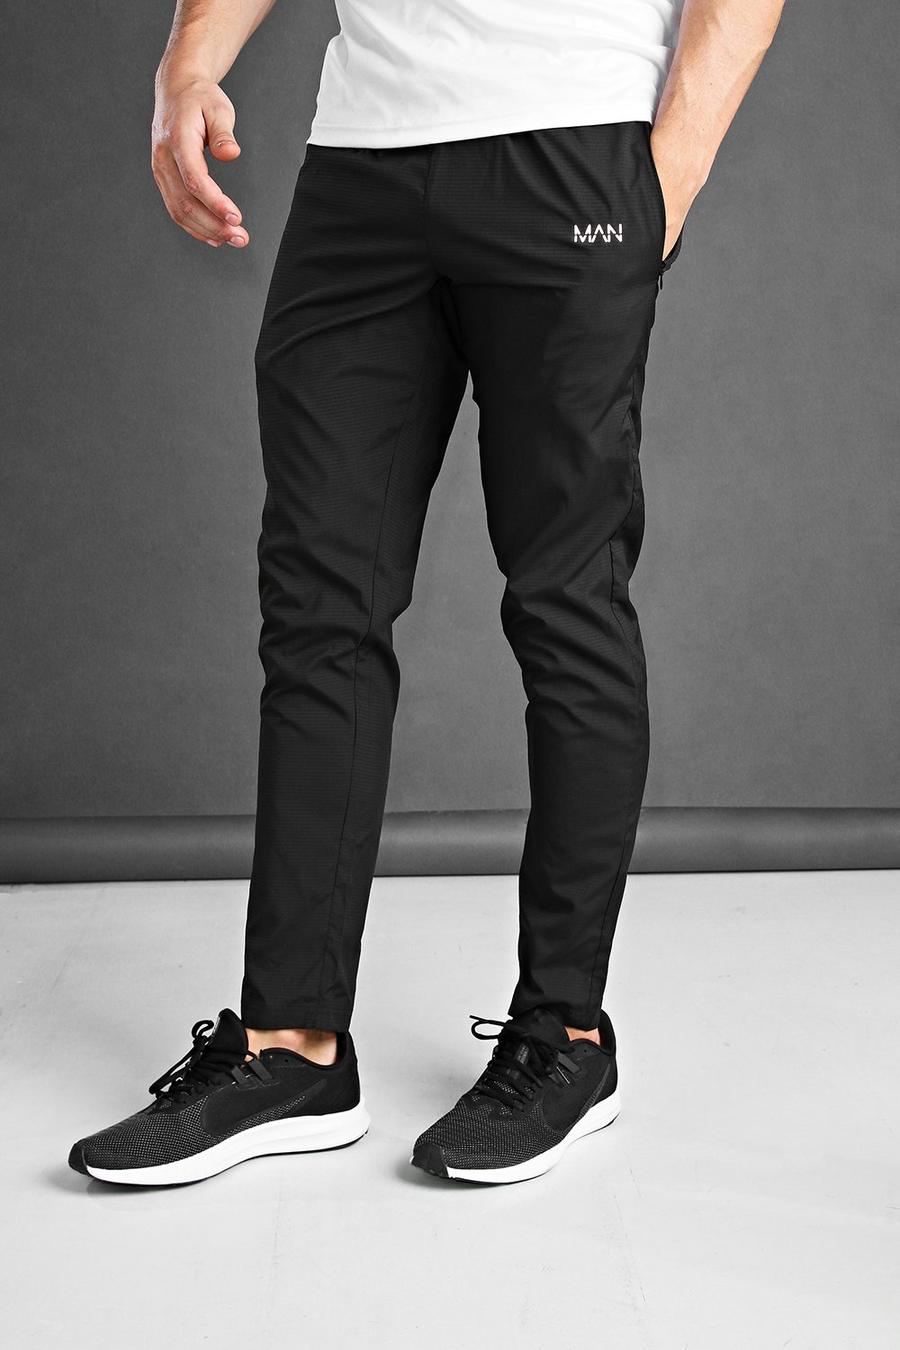 Black Man Active Gym Skinny Woven Joggers